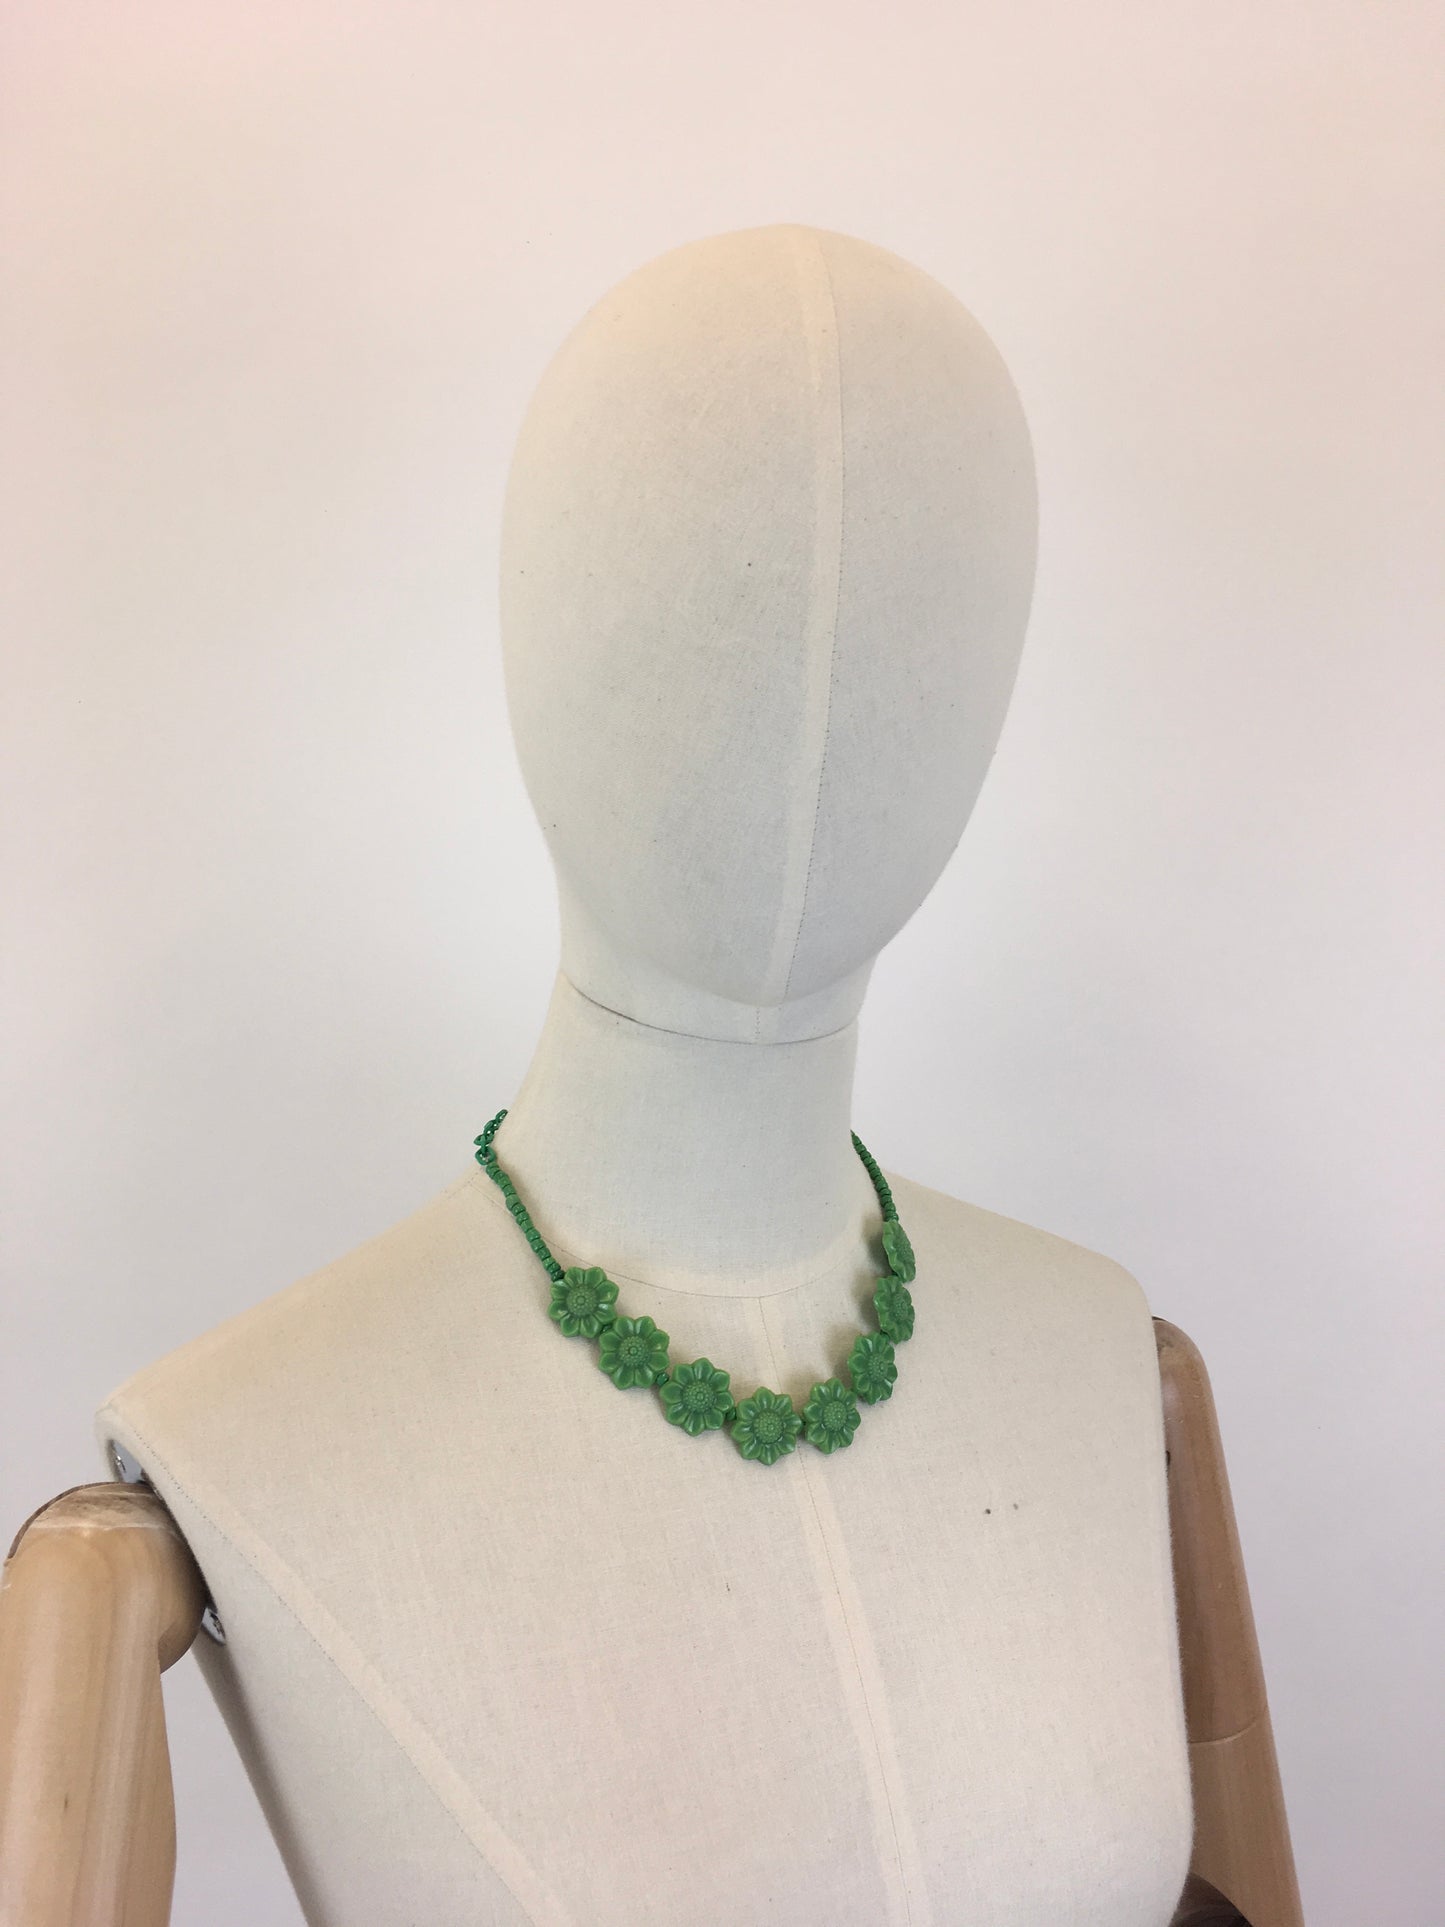 Original 1940’s Green Early Plastic Necklace - With Florals and Beads